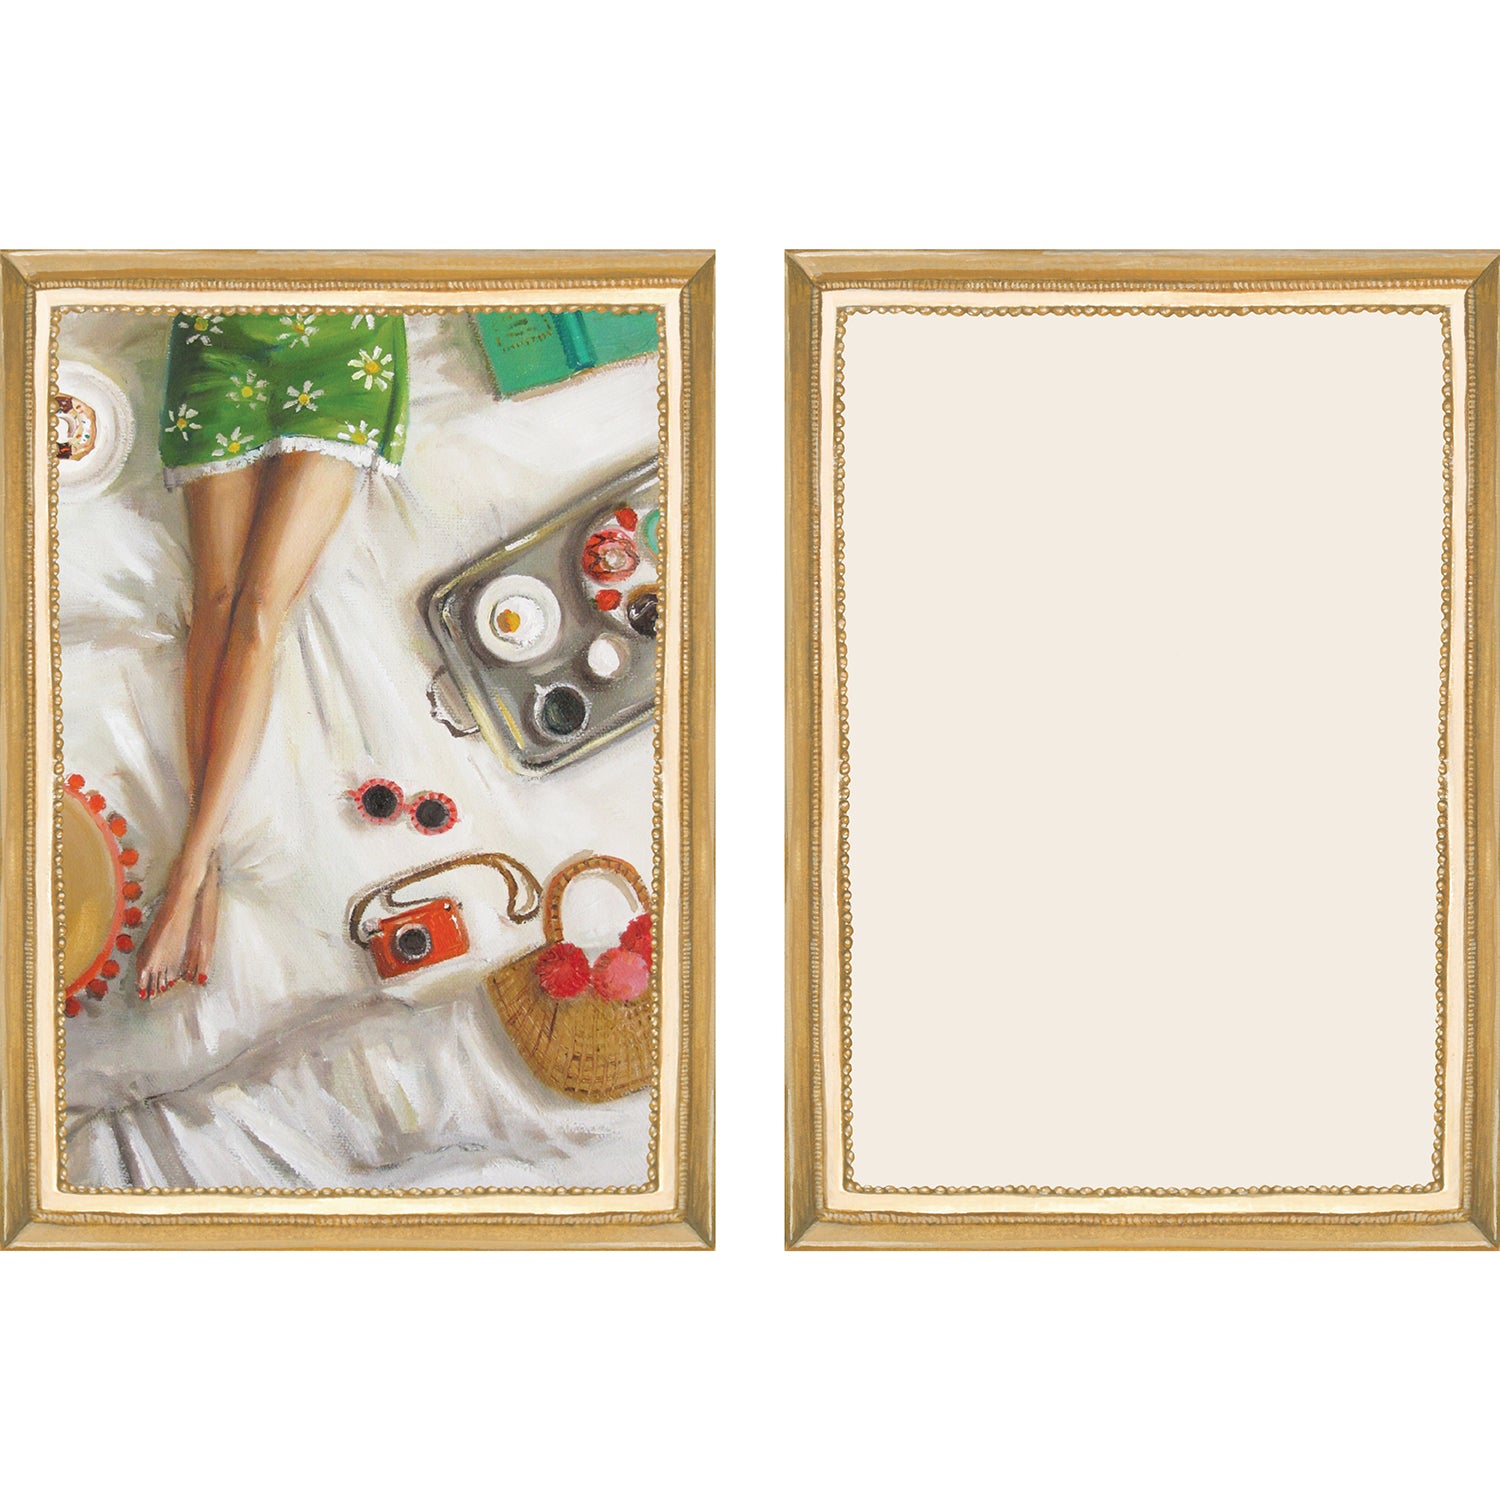 The illustrated front and blank back of a Flat Note, both sides framed in gold, featuring a painterly illustrated top-down view of a woman&